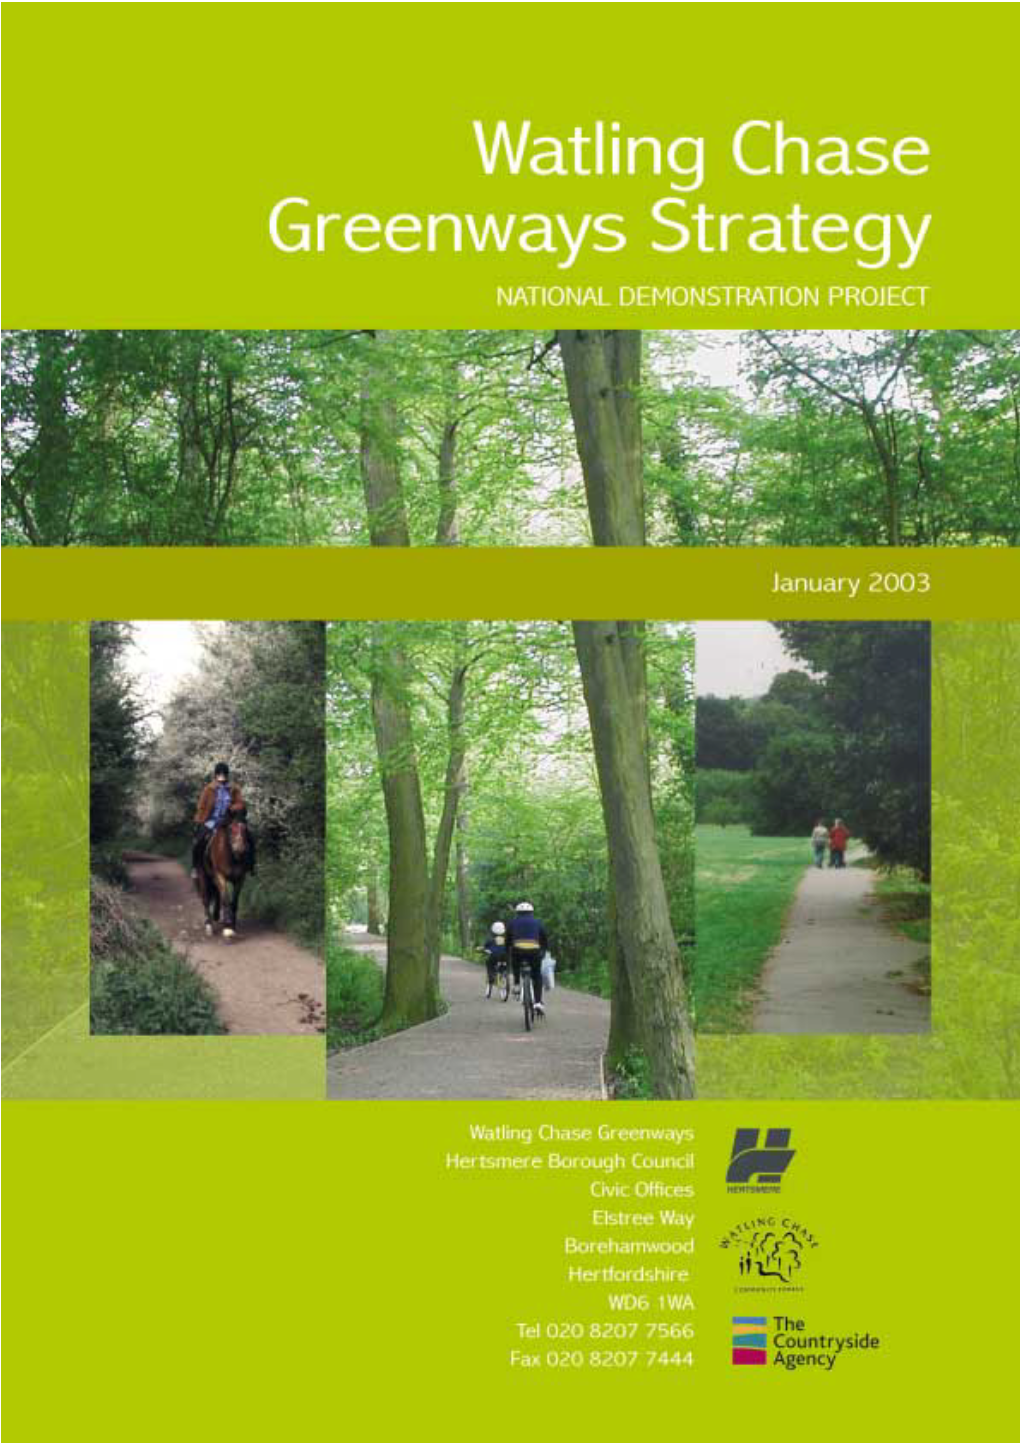 Watling Chase Greenways Strategy